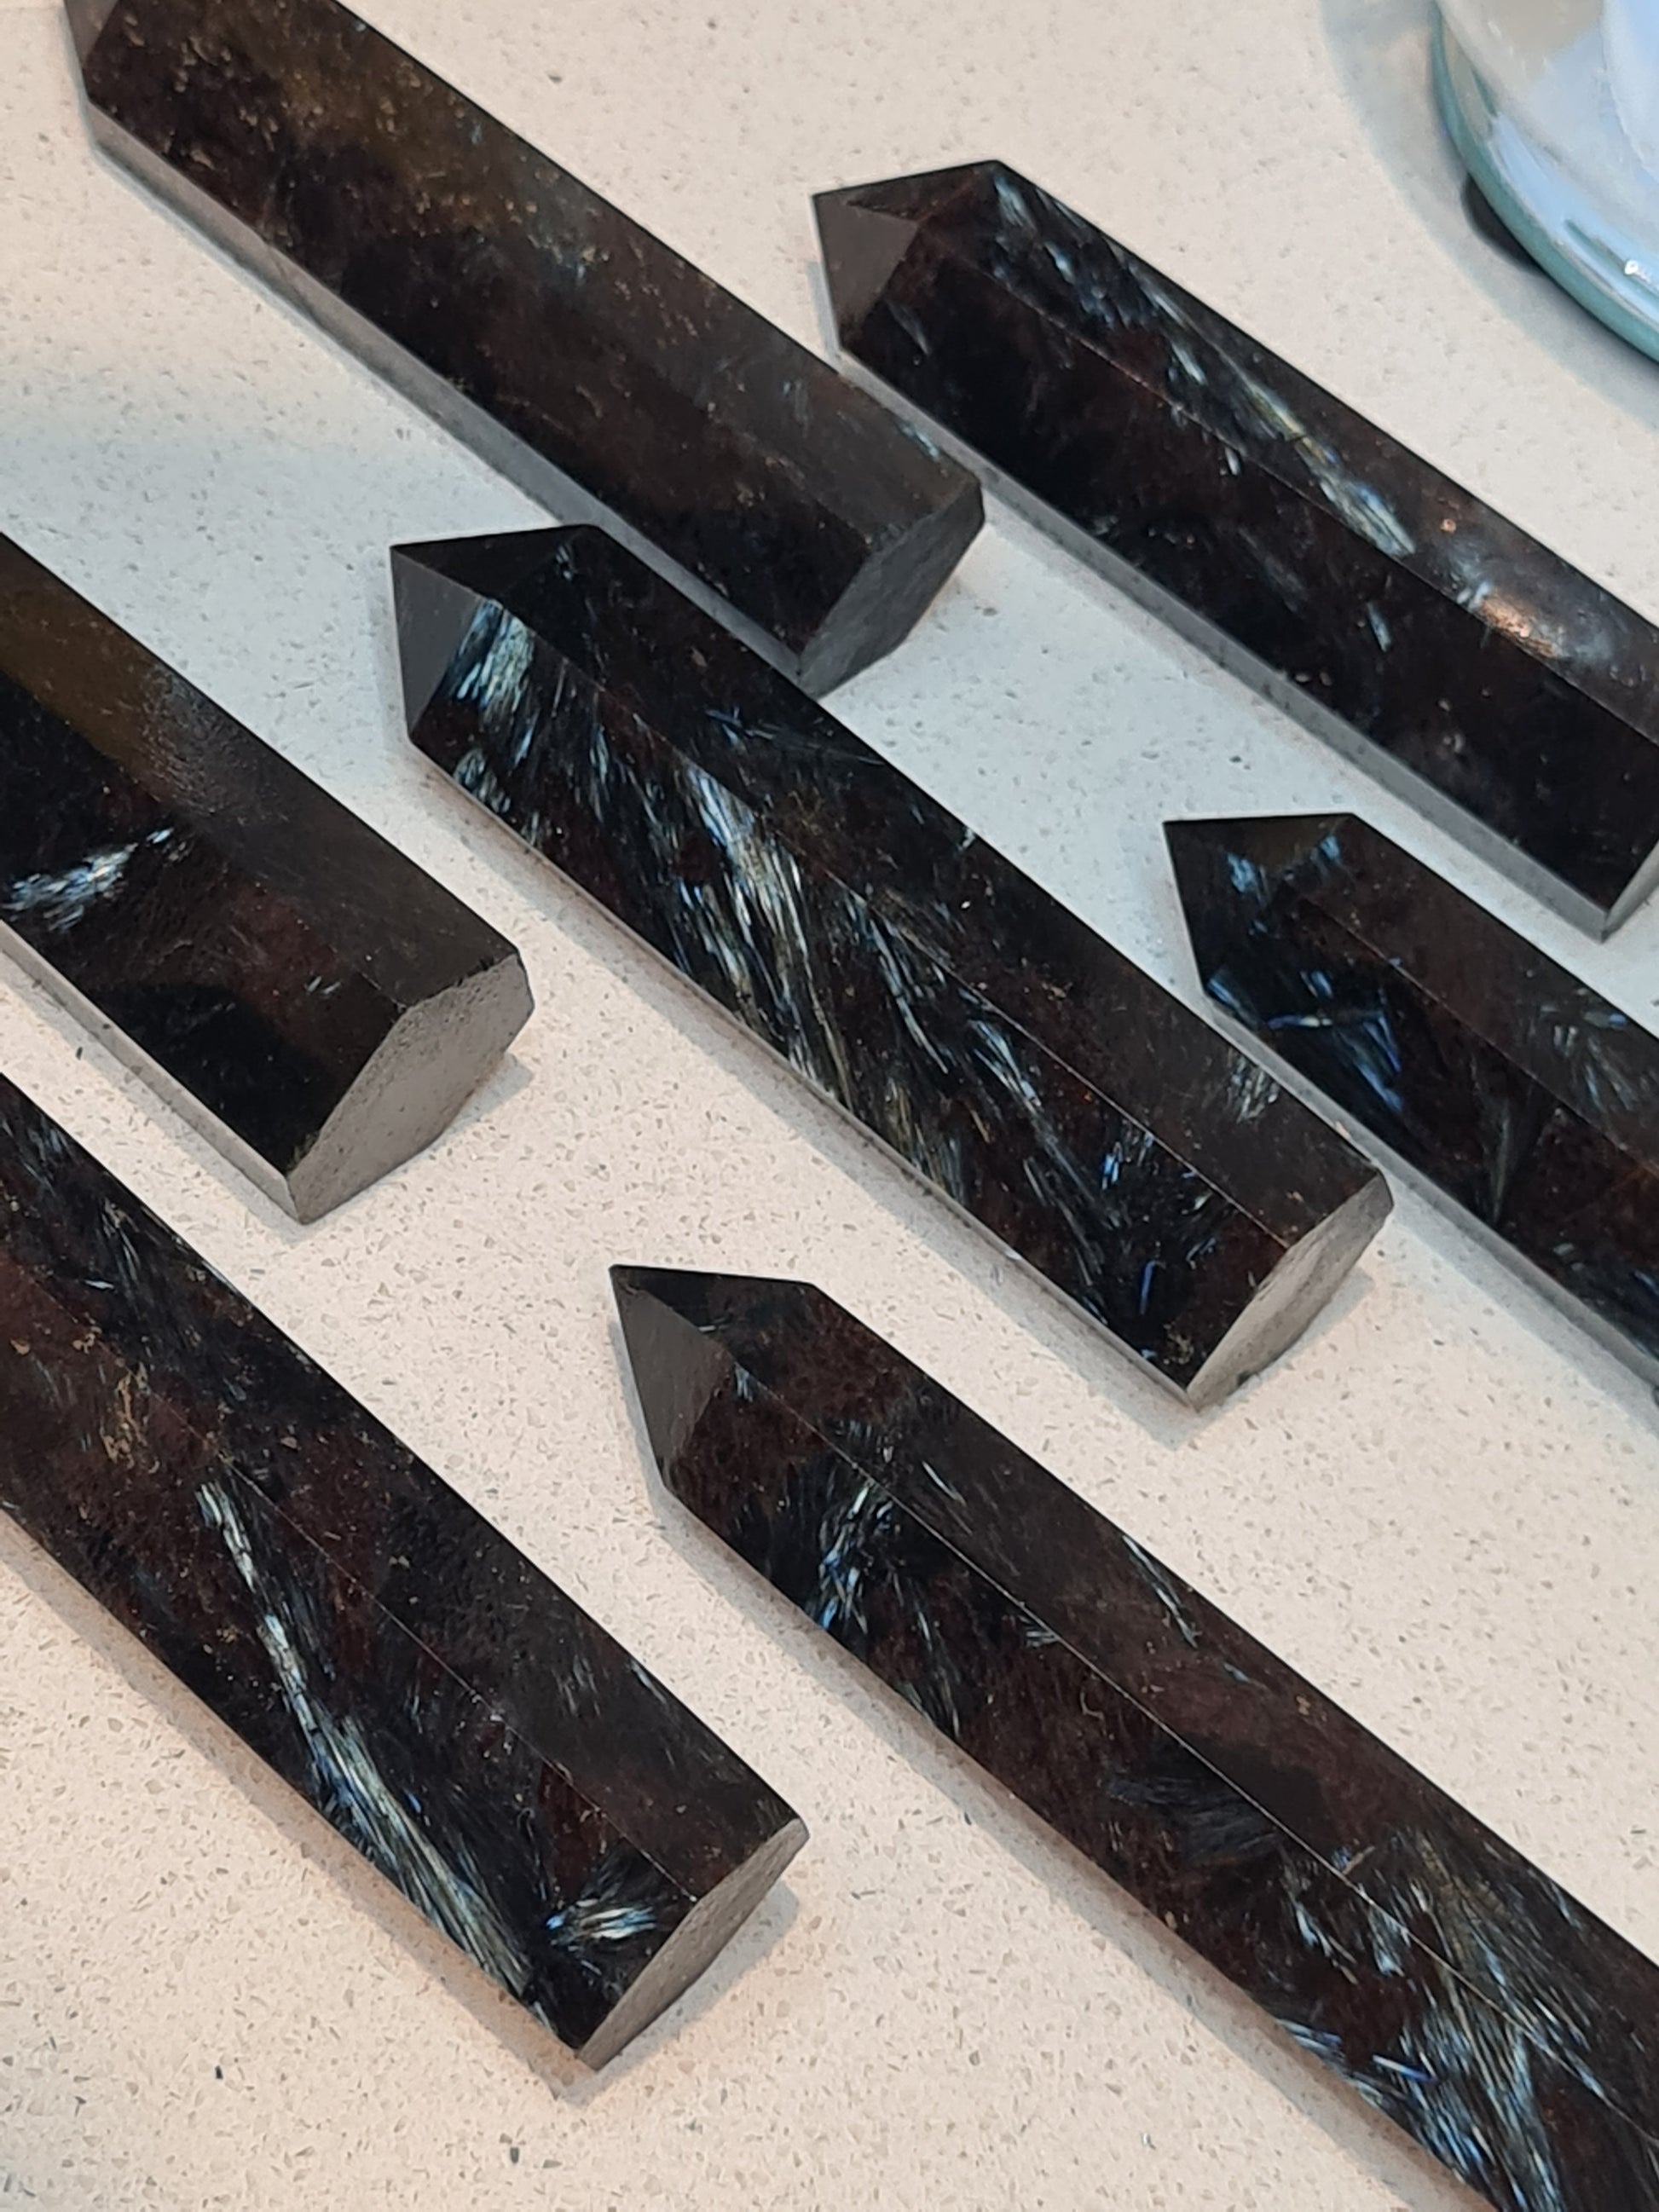 Arfvedonite Firework Stone Crystal Towers, black bodycolour with white and blue flashy inclusions